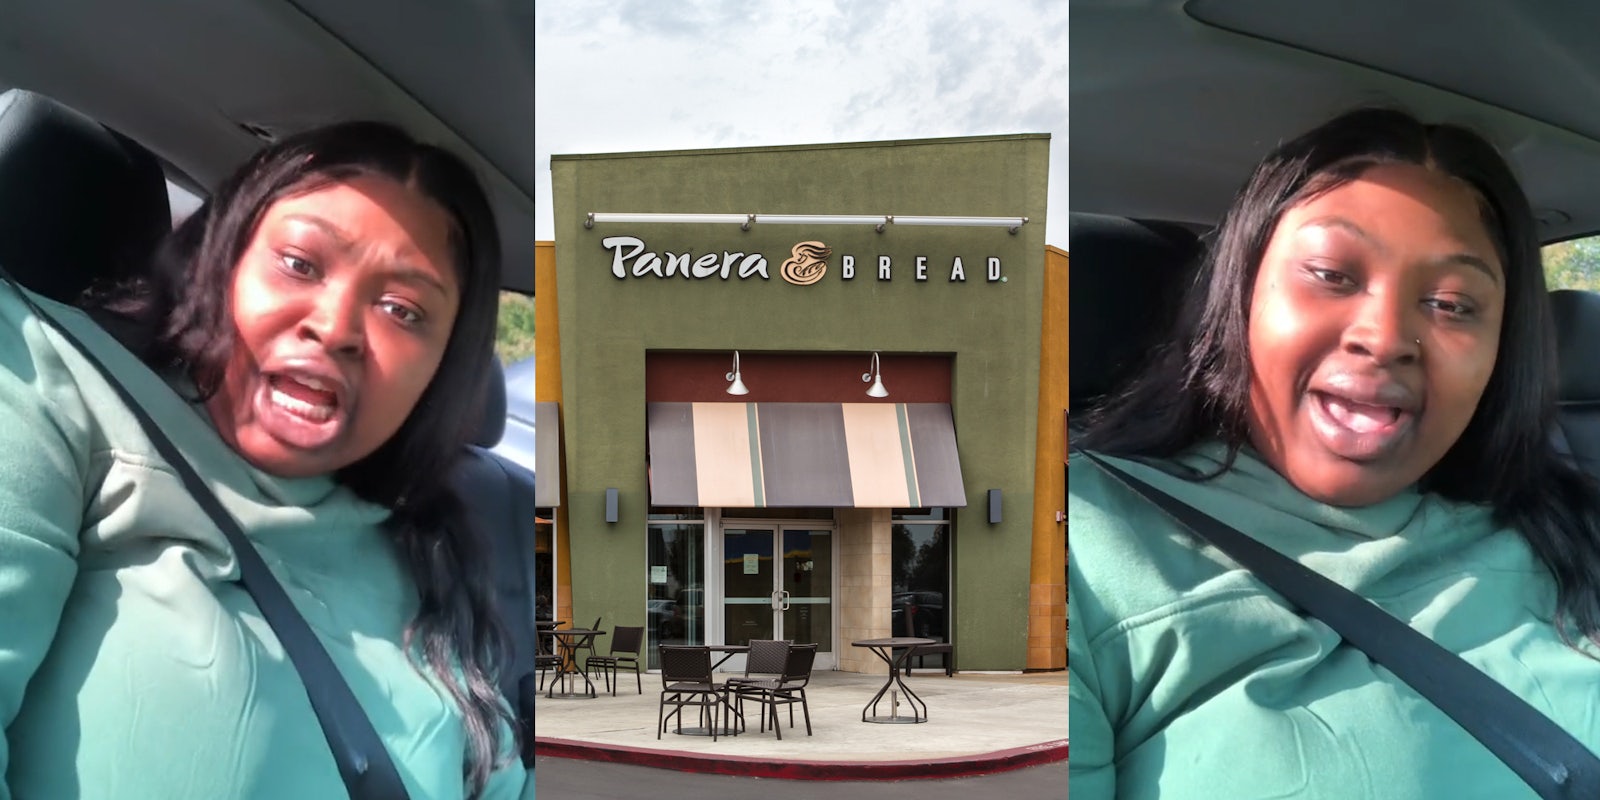 woman speaking in car (l) Panera restaurant with sign and outdoor seating (c) woman speaking in car (r)